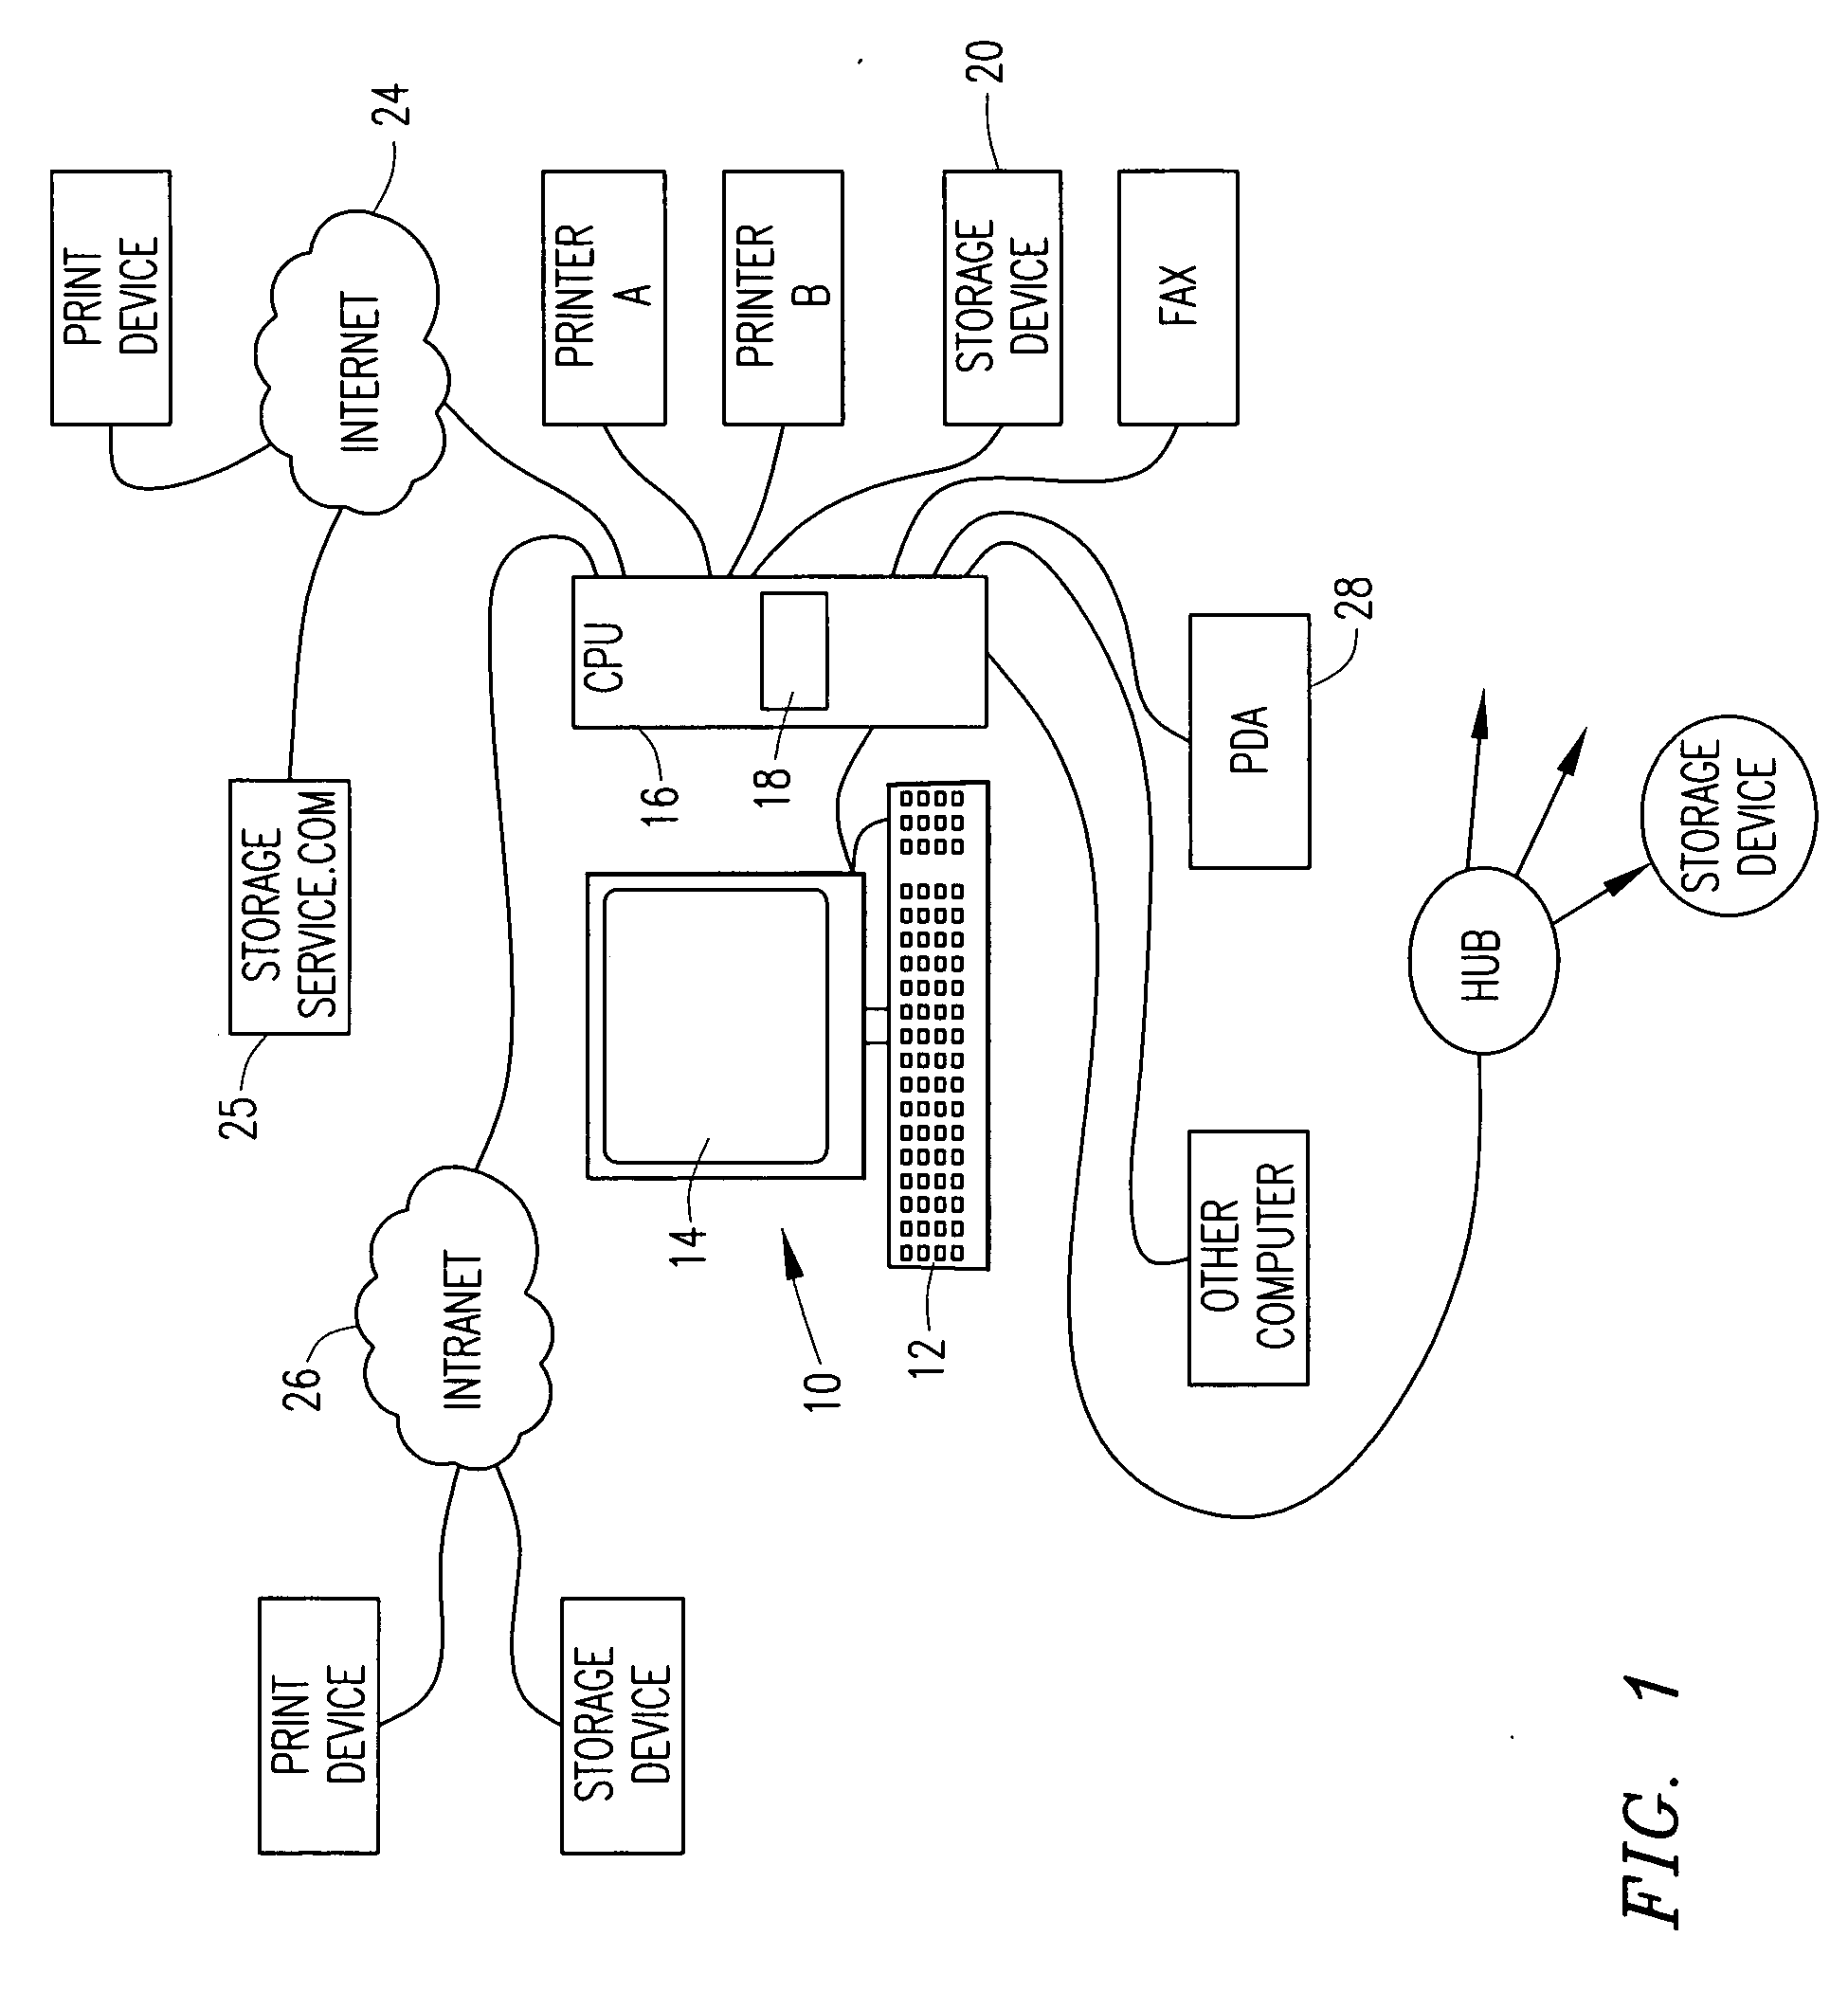 Method and graphic interface for storing, moving, sending or printing electronic data to two or more locations, in two or more formats with a single save function